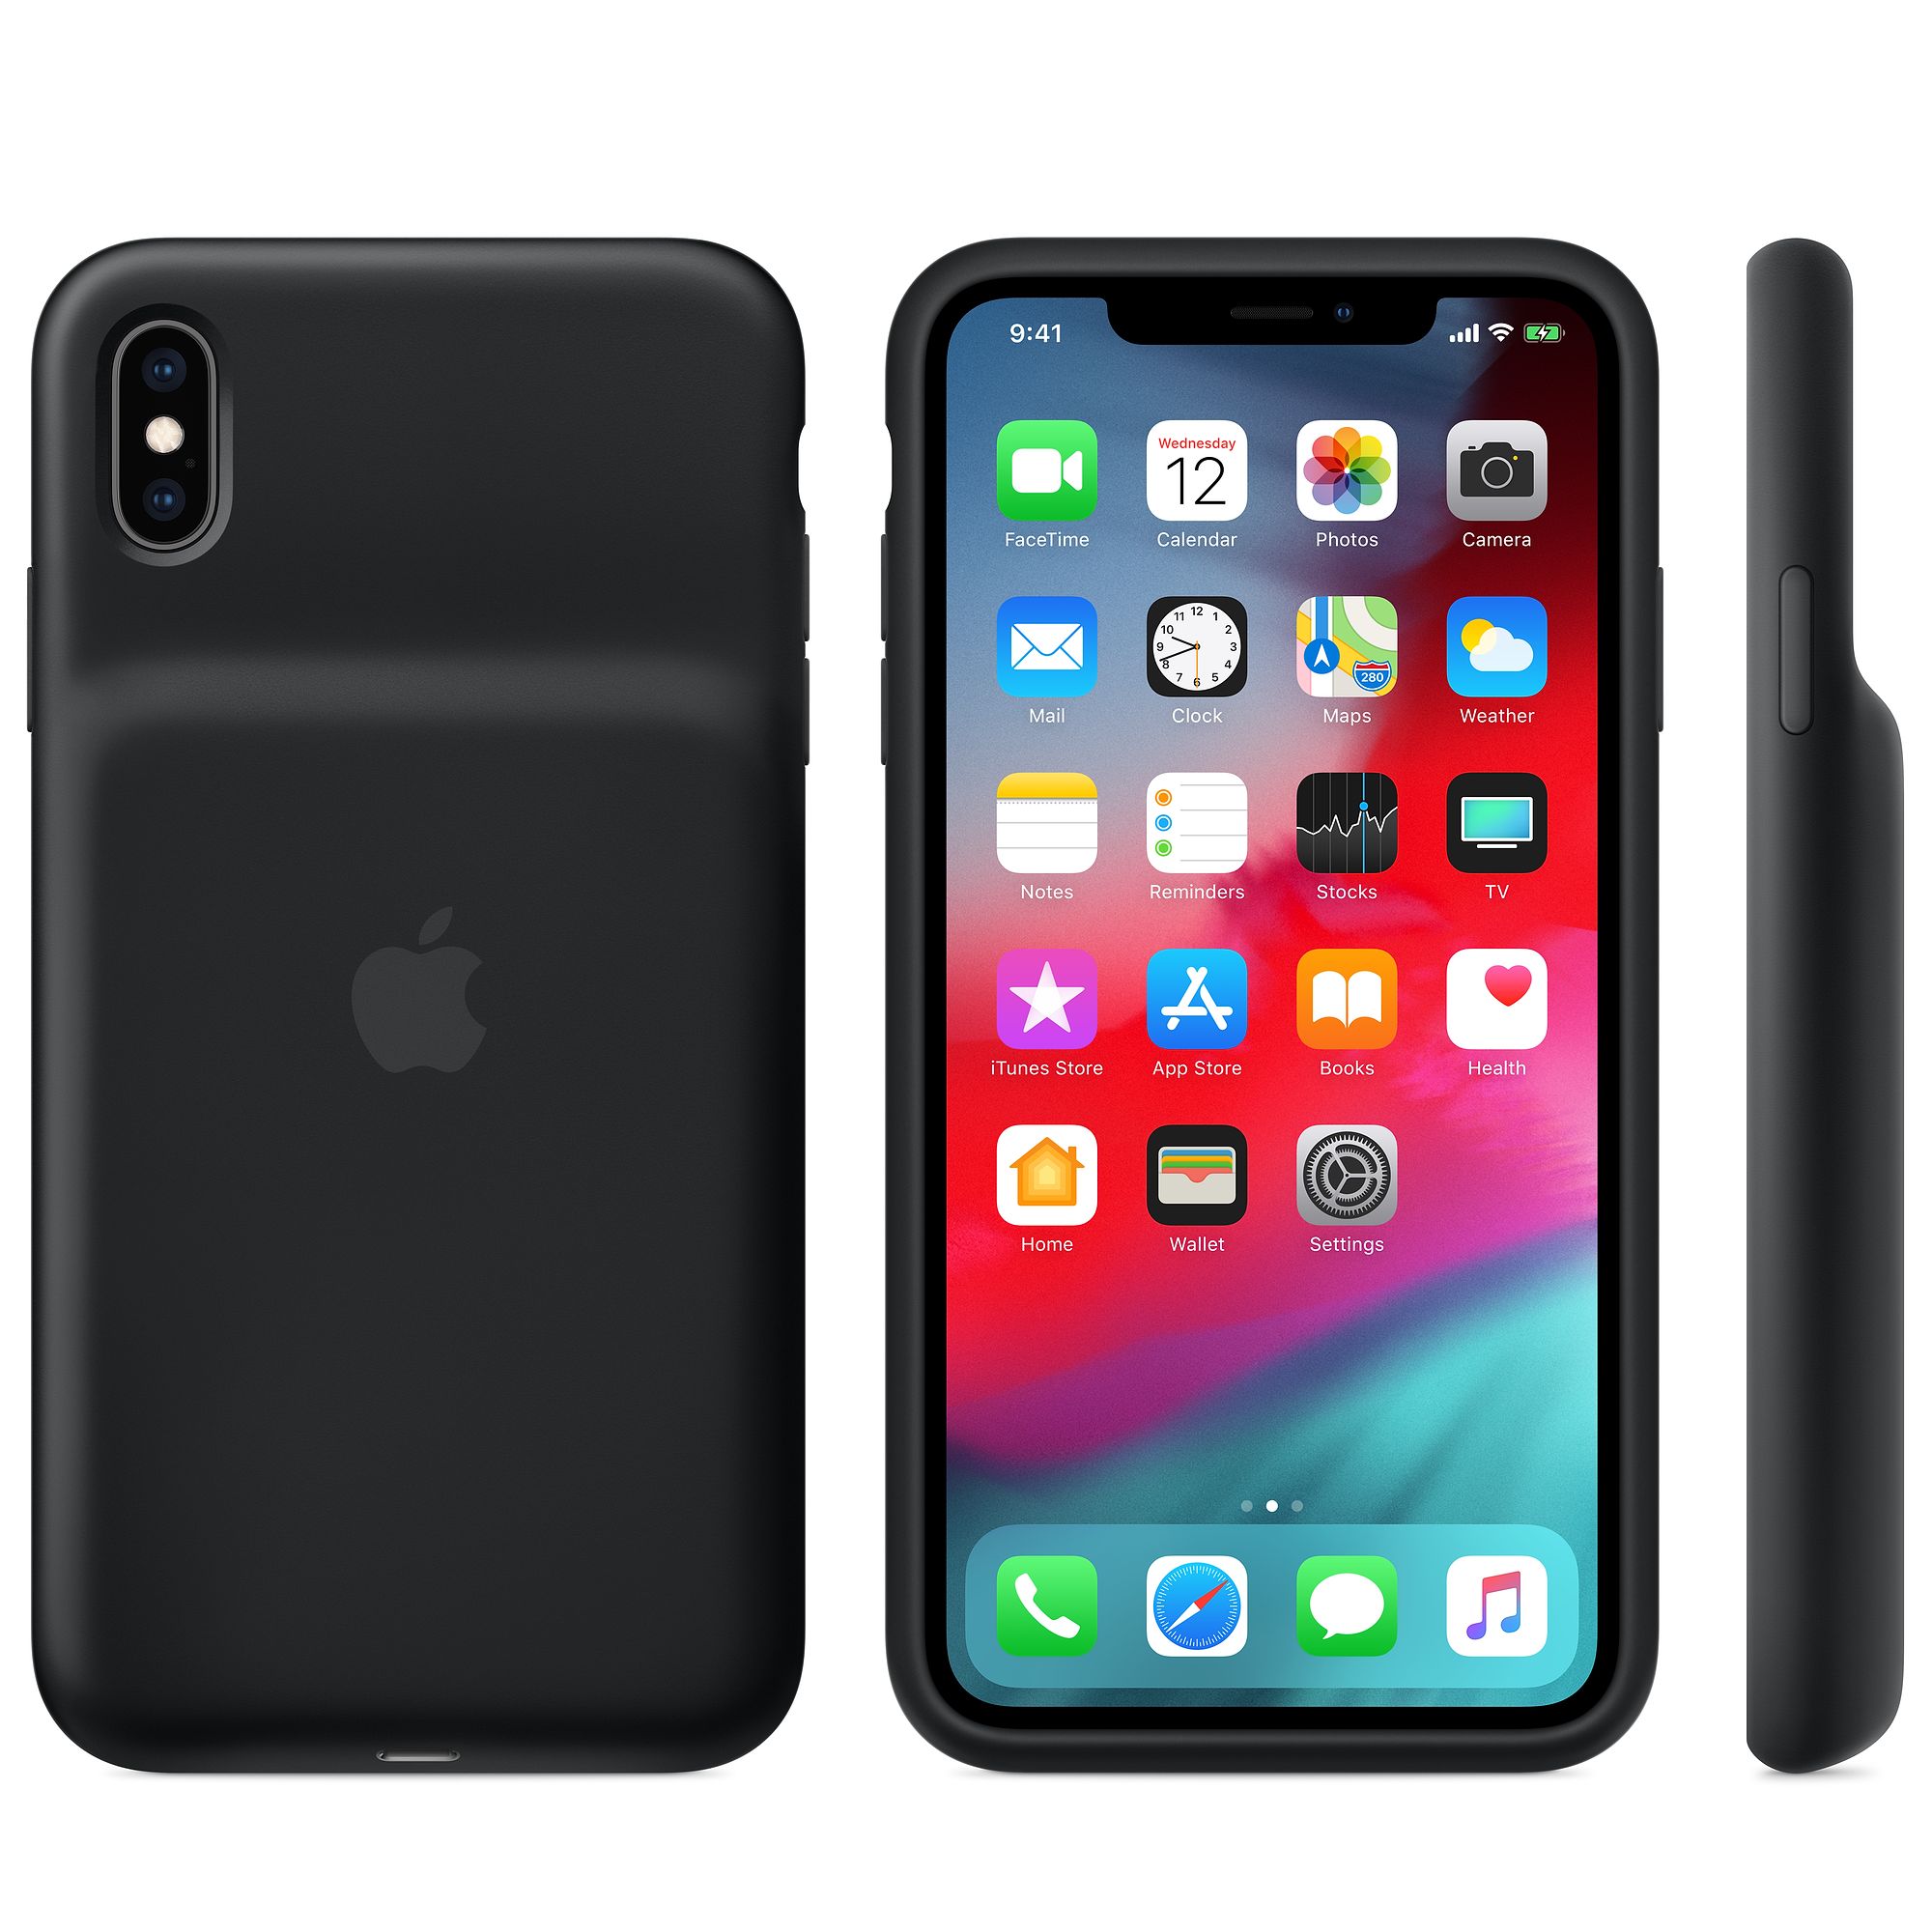 Smart Battery Cases for XS, XS Max and XR iPhones are now available for purchase. [atualizado 2x]